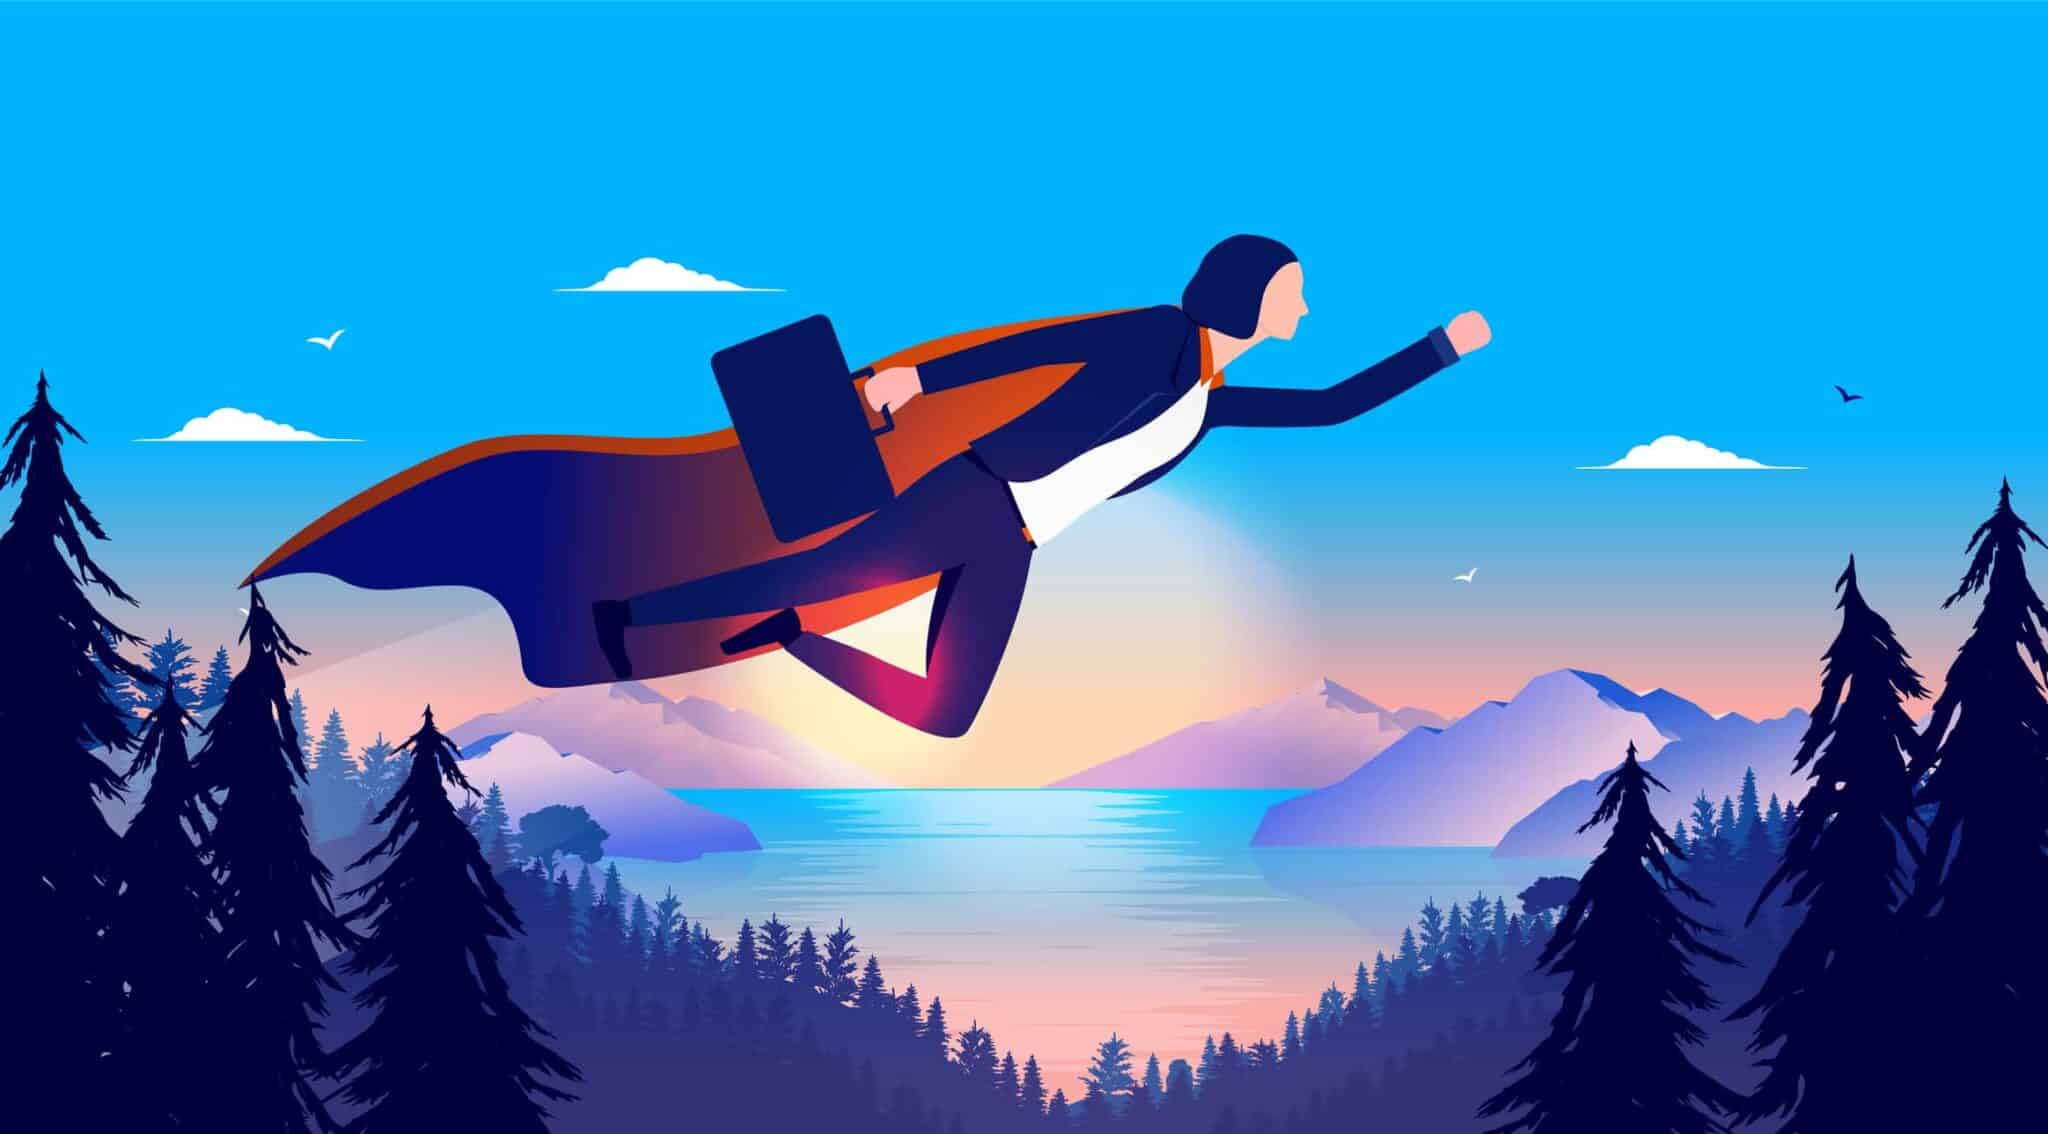 A businessman with superpowers, wearing a cape, soaring through the sky over a tranquil lake.